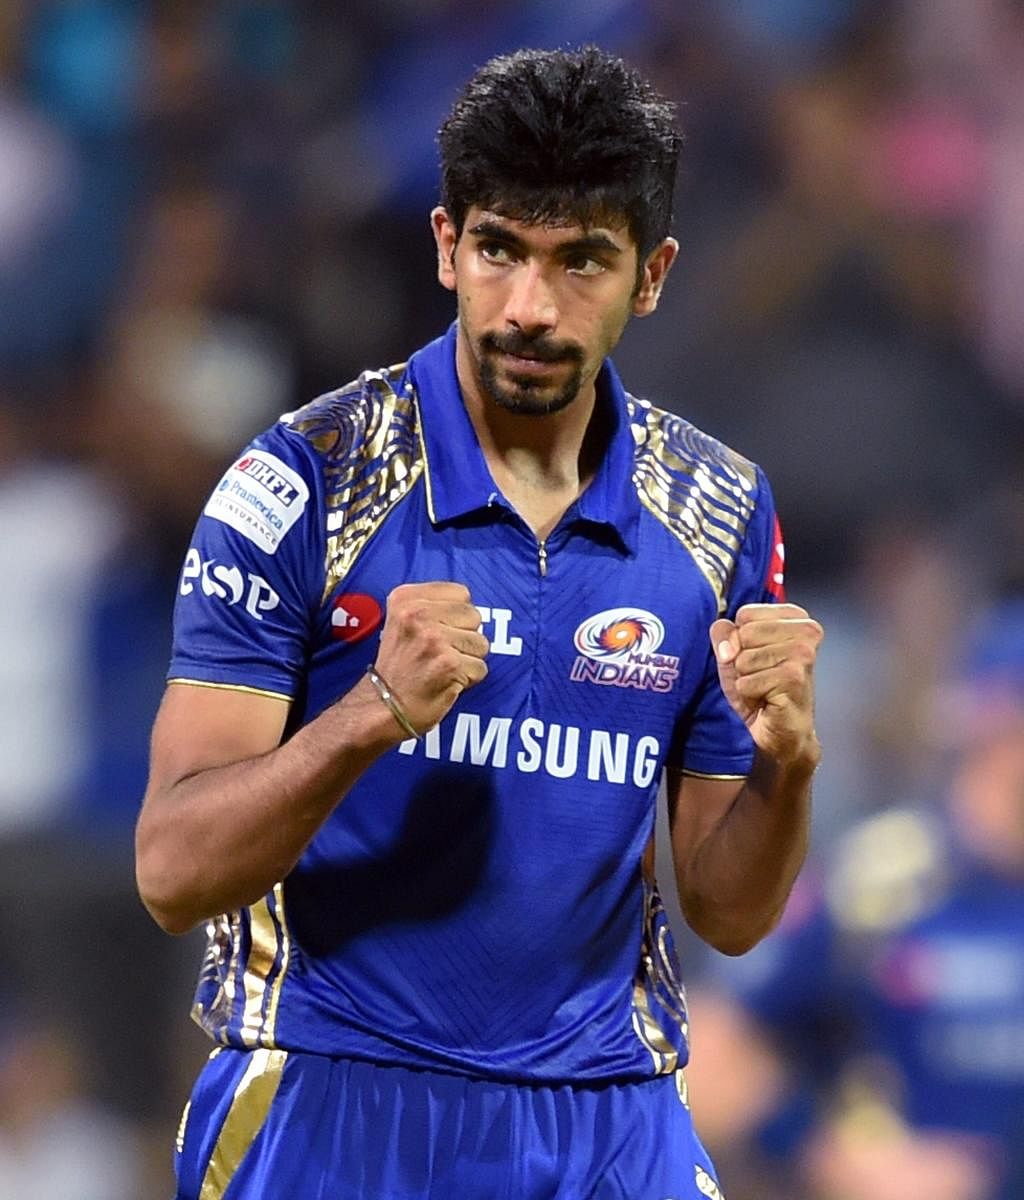 TURNING IT AROUND: Mumbai Indians’ Jasprit Bumrah bowled a brilliant spell at the death to help his side snatch a close win over Kings XI Punjab. PTI